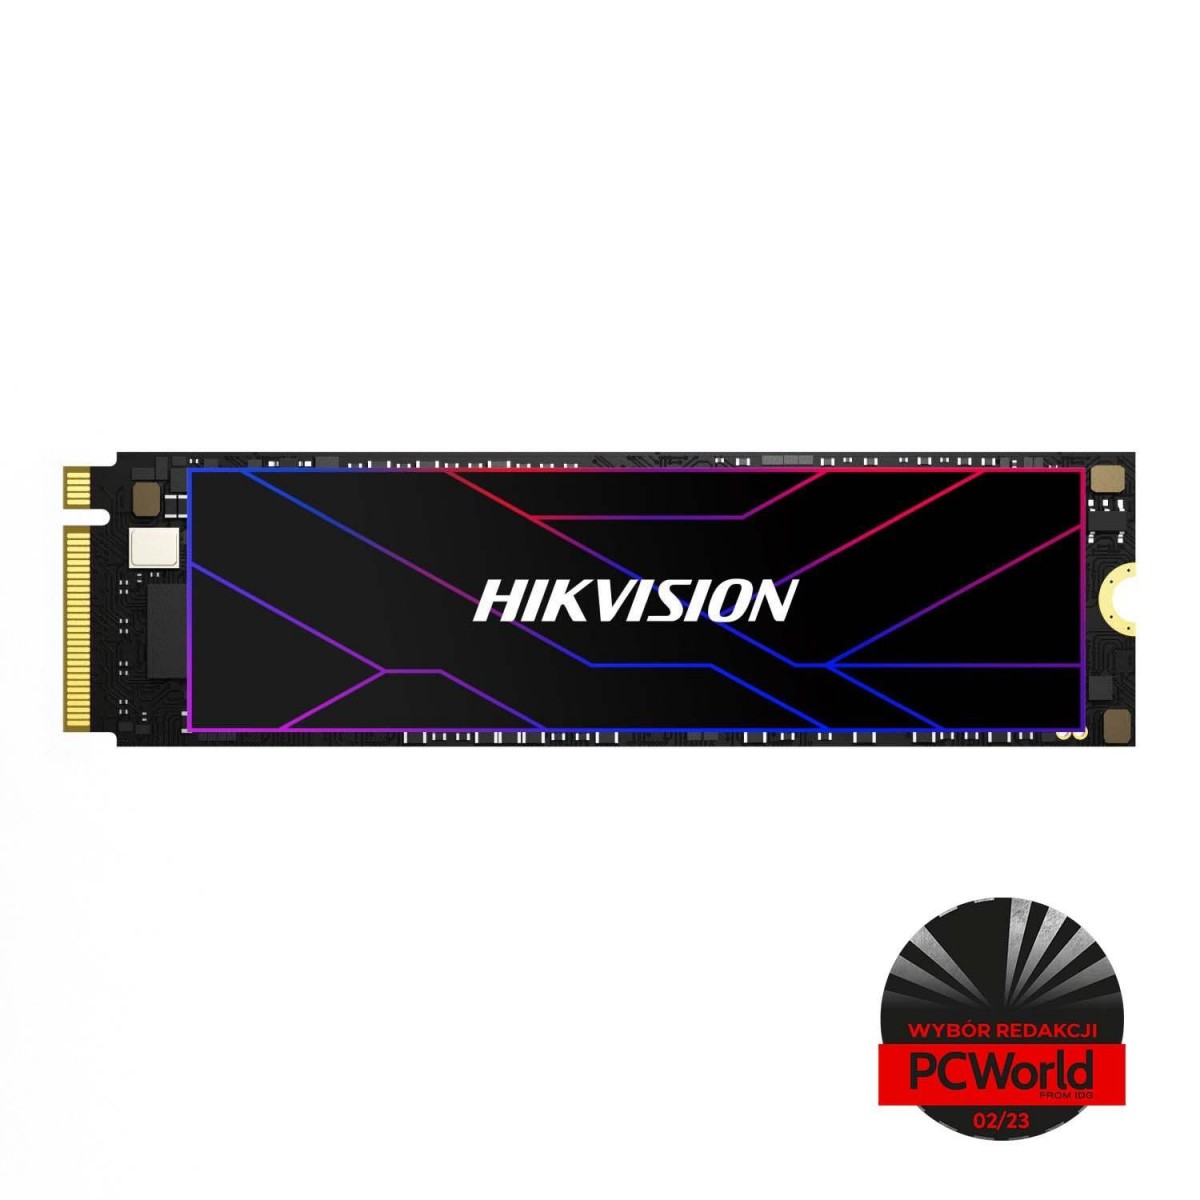 Dysk SSD HIKVISION G4000 2TB M.2 PCIe Gen4x4 NVMe 2280 (7450-6750 MB-s)